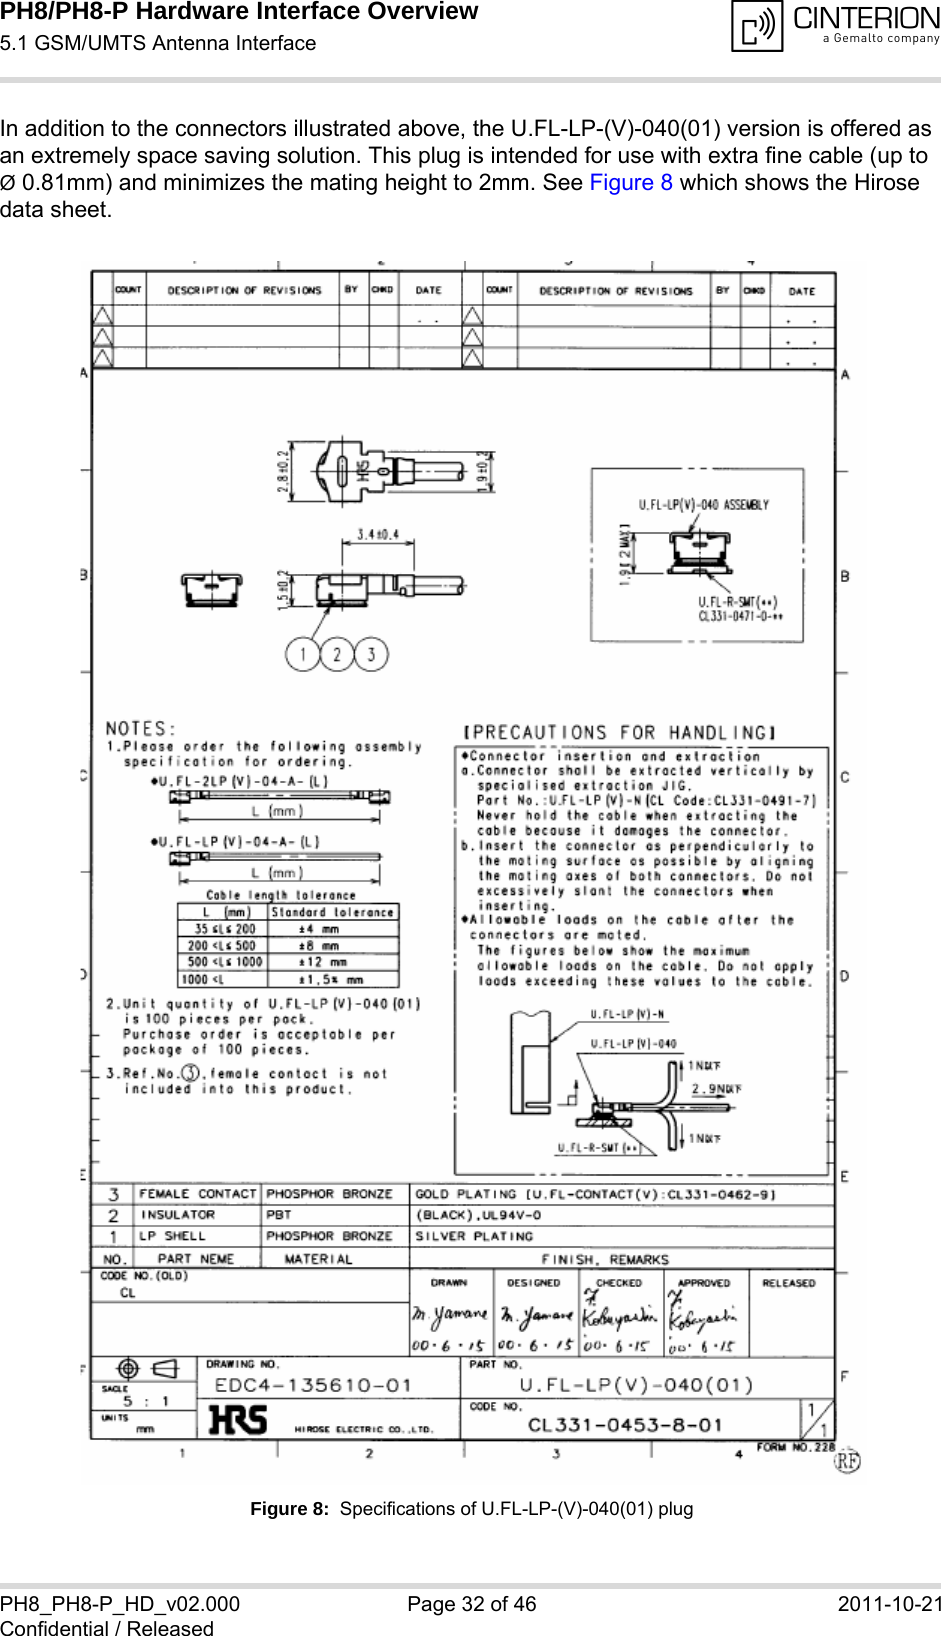 PH8/PH8-P Hardware Interface Overview5.1 GSM/UMTS Antenna Interface34PH8_PH8-P_HD_v02.000 Page 32 of 46 2011-10-21Confidential / ReleasedIn addition to the connectors illustrated above, the U.FL-LP-(V)-040(01) version is offered as an extremely space saving solution. This plug is intended for use with extra fine cable (up to Ø0.81mm) and minimizes the mating height to 2mm. See Figure 8 which shows the Hirose data sheet.Figure 8:  Specifications of U.FL-LP-(V)-040(01) plug